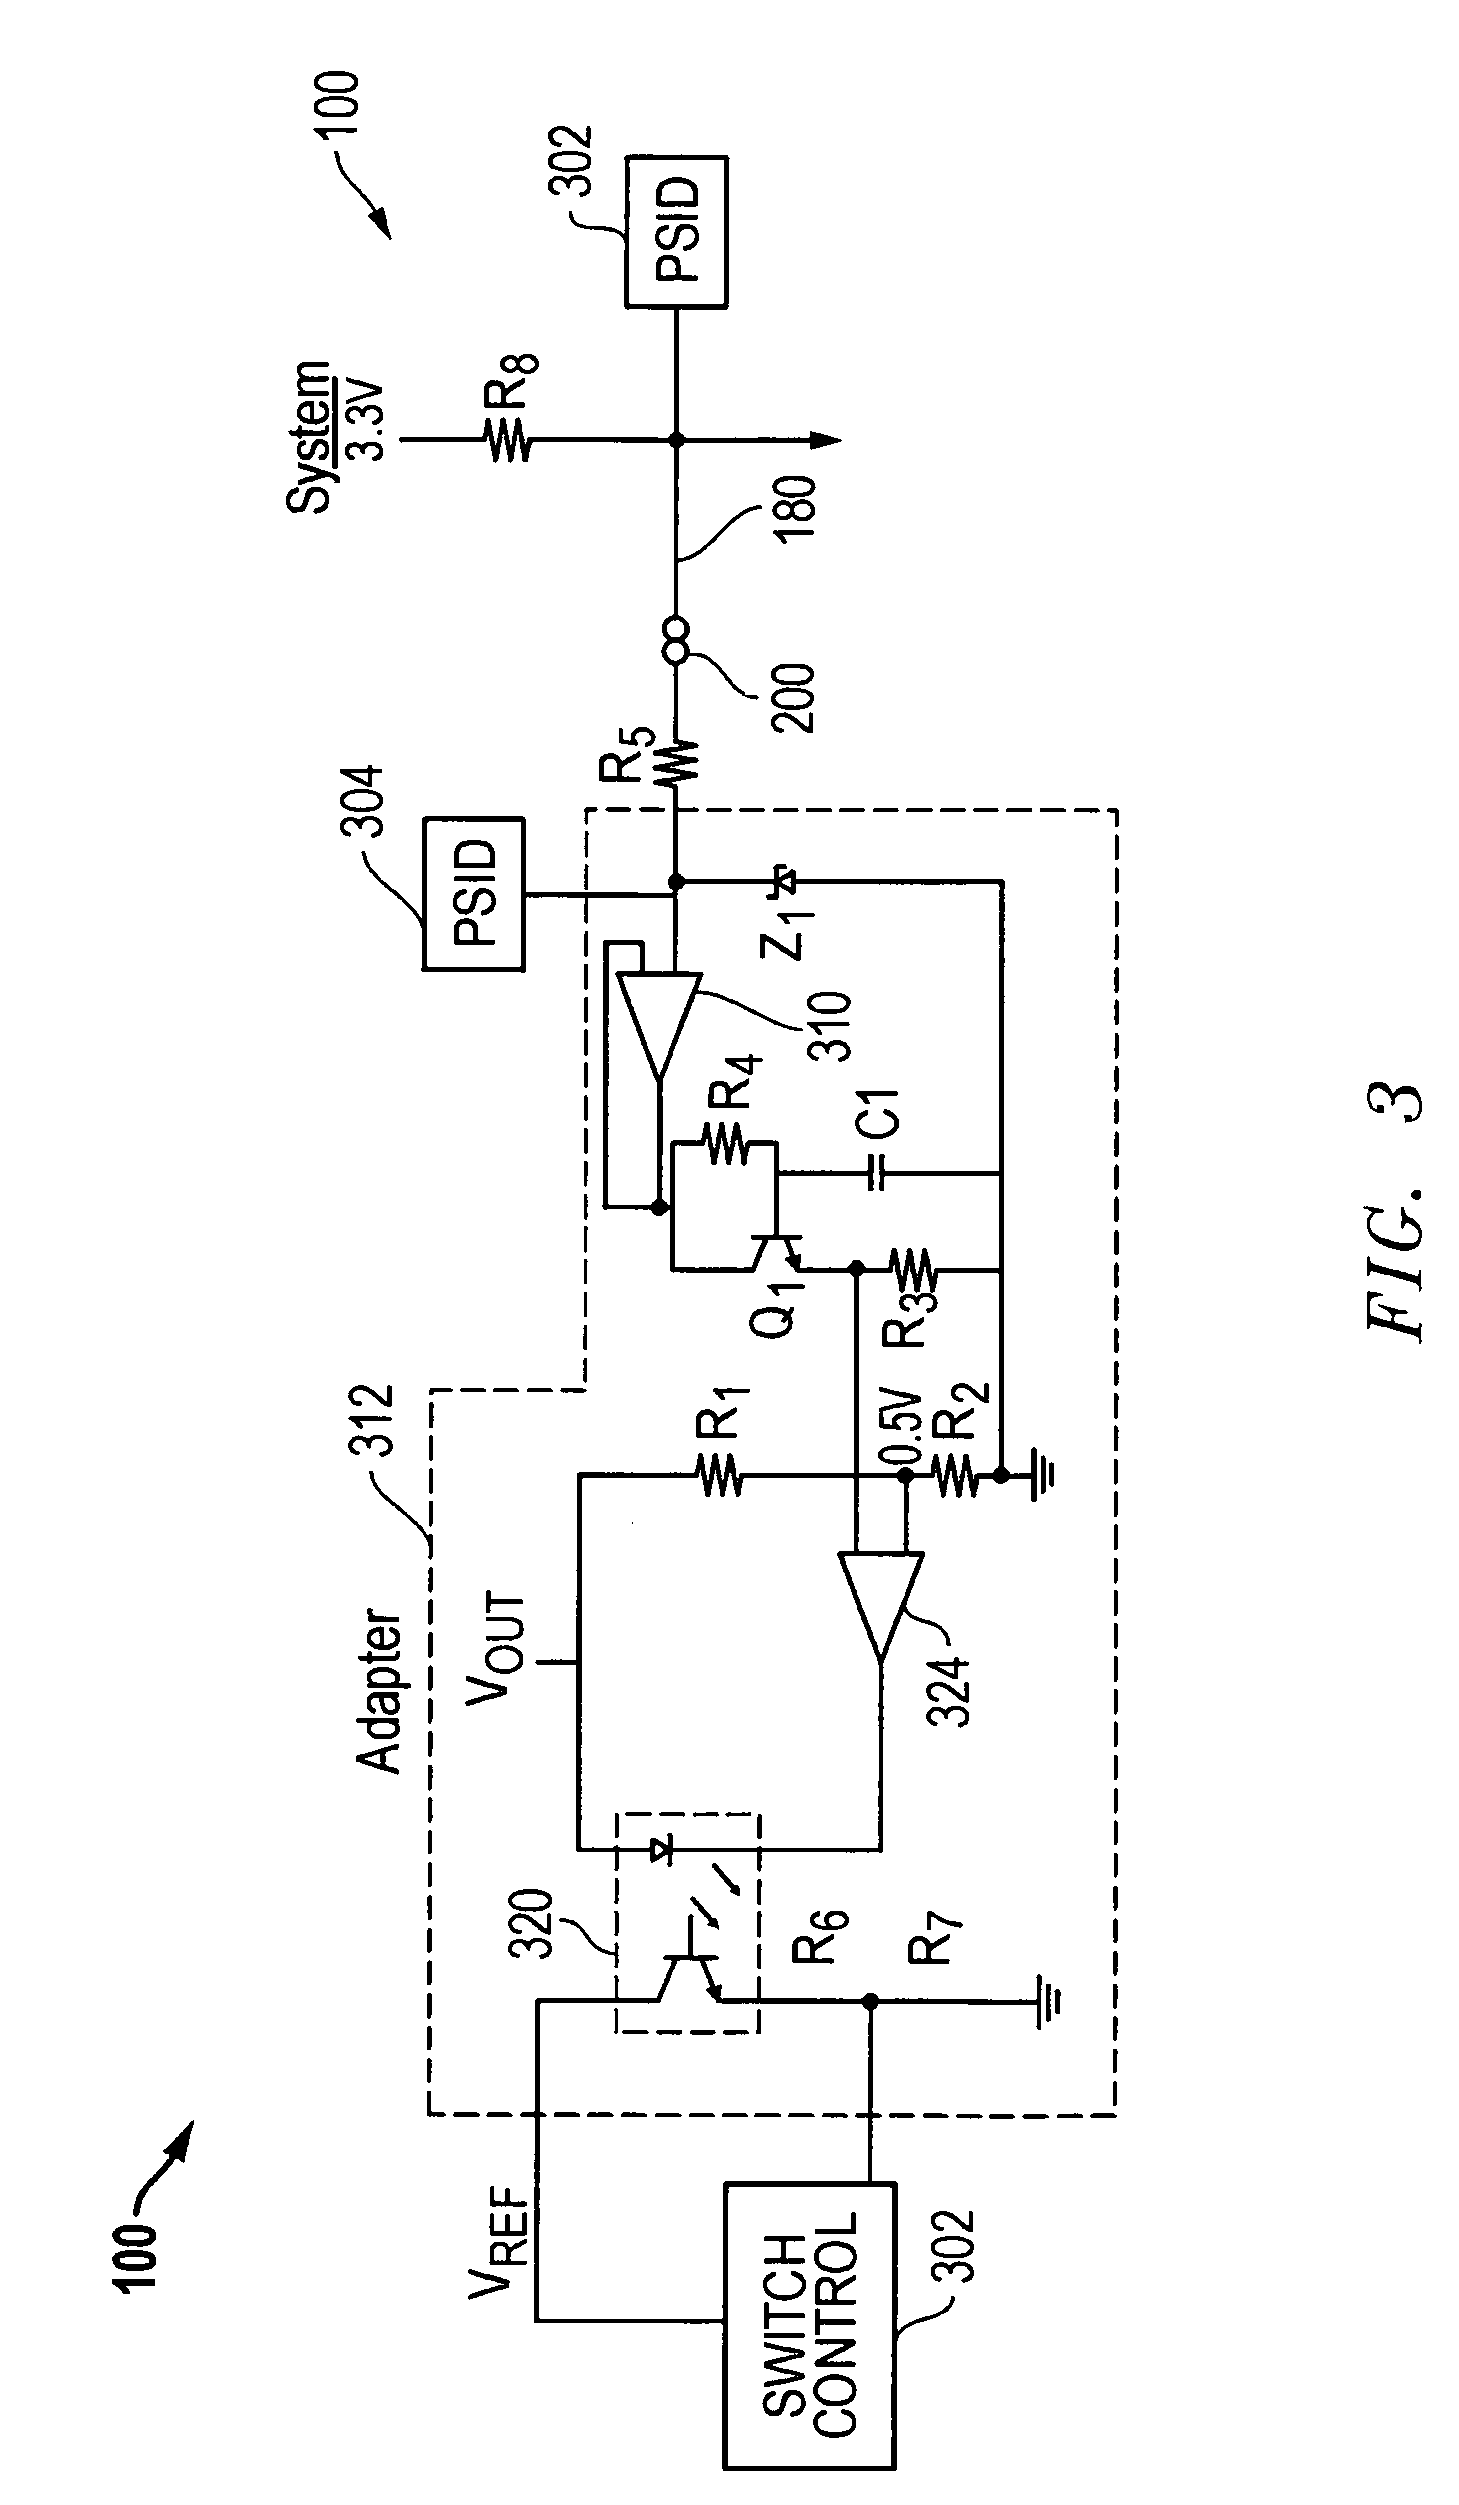 Systems and methods for controlling energy consumption of AC-DC adapters